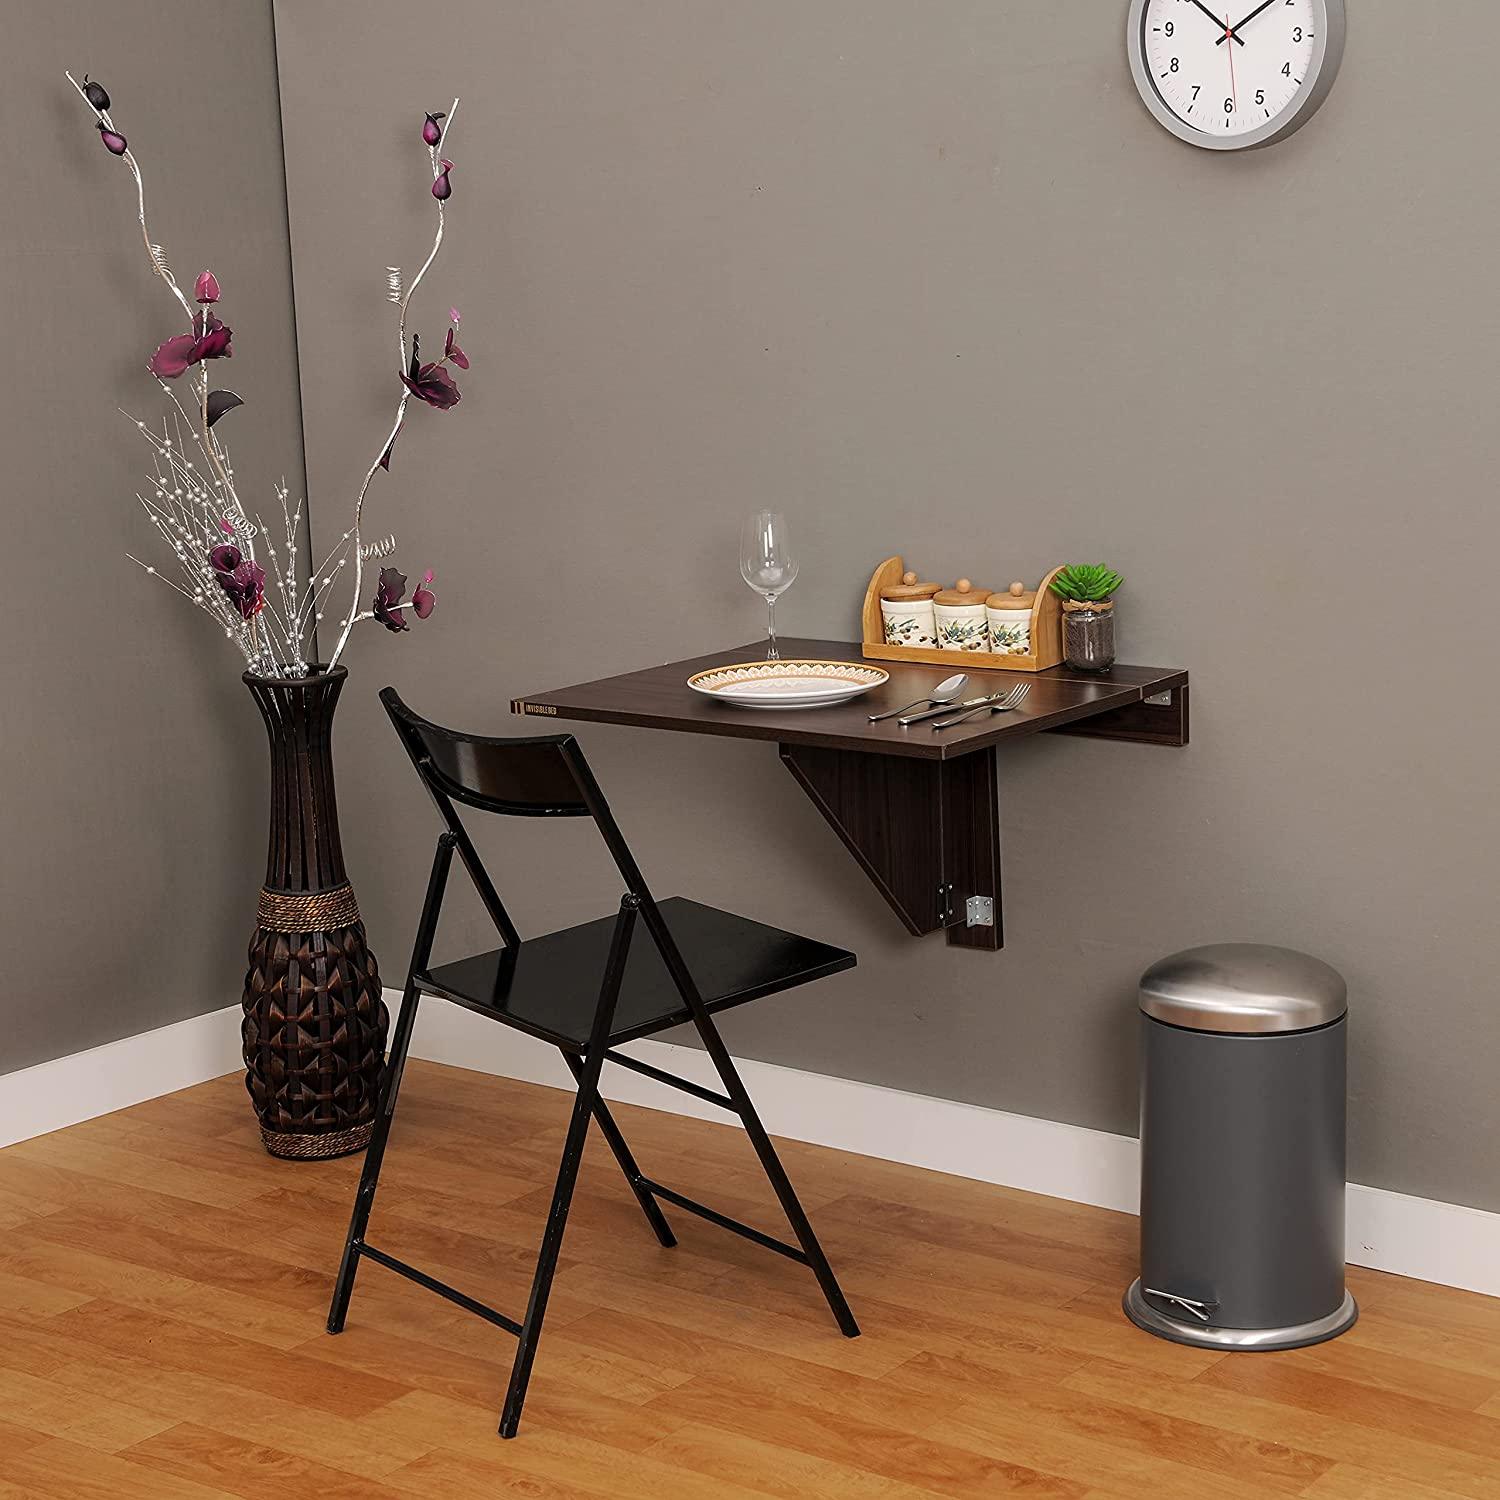 Wall Mounted iDesk with Ledge & Mesh Back Office Chair